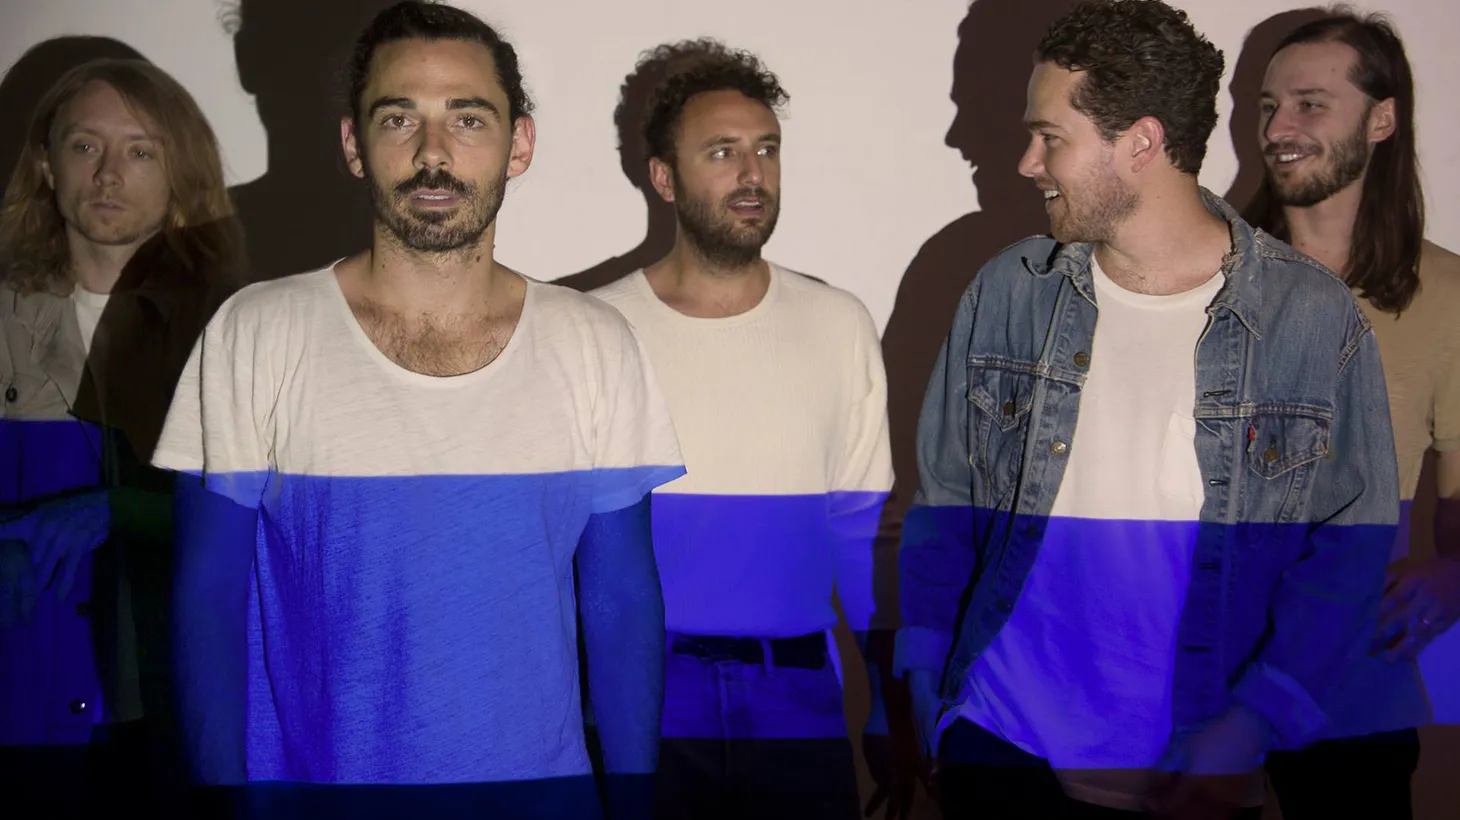 LA quintet Local Natives returns with its highly anticipated third album, exploring a variety of new sounds.